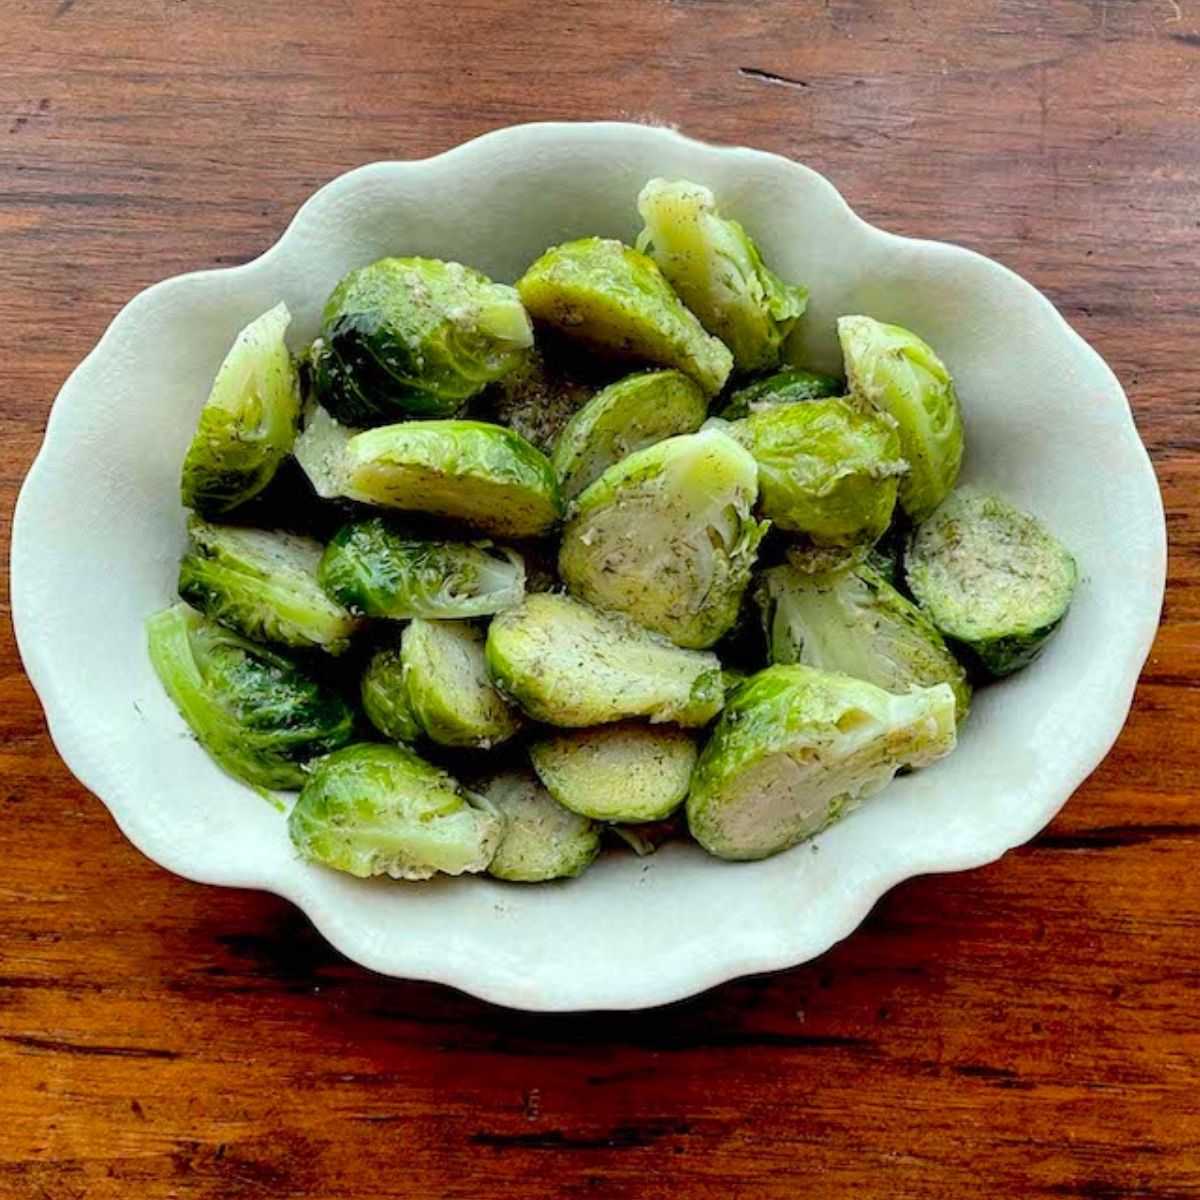 dilled brussels sprouts